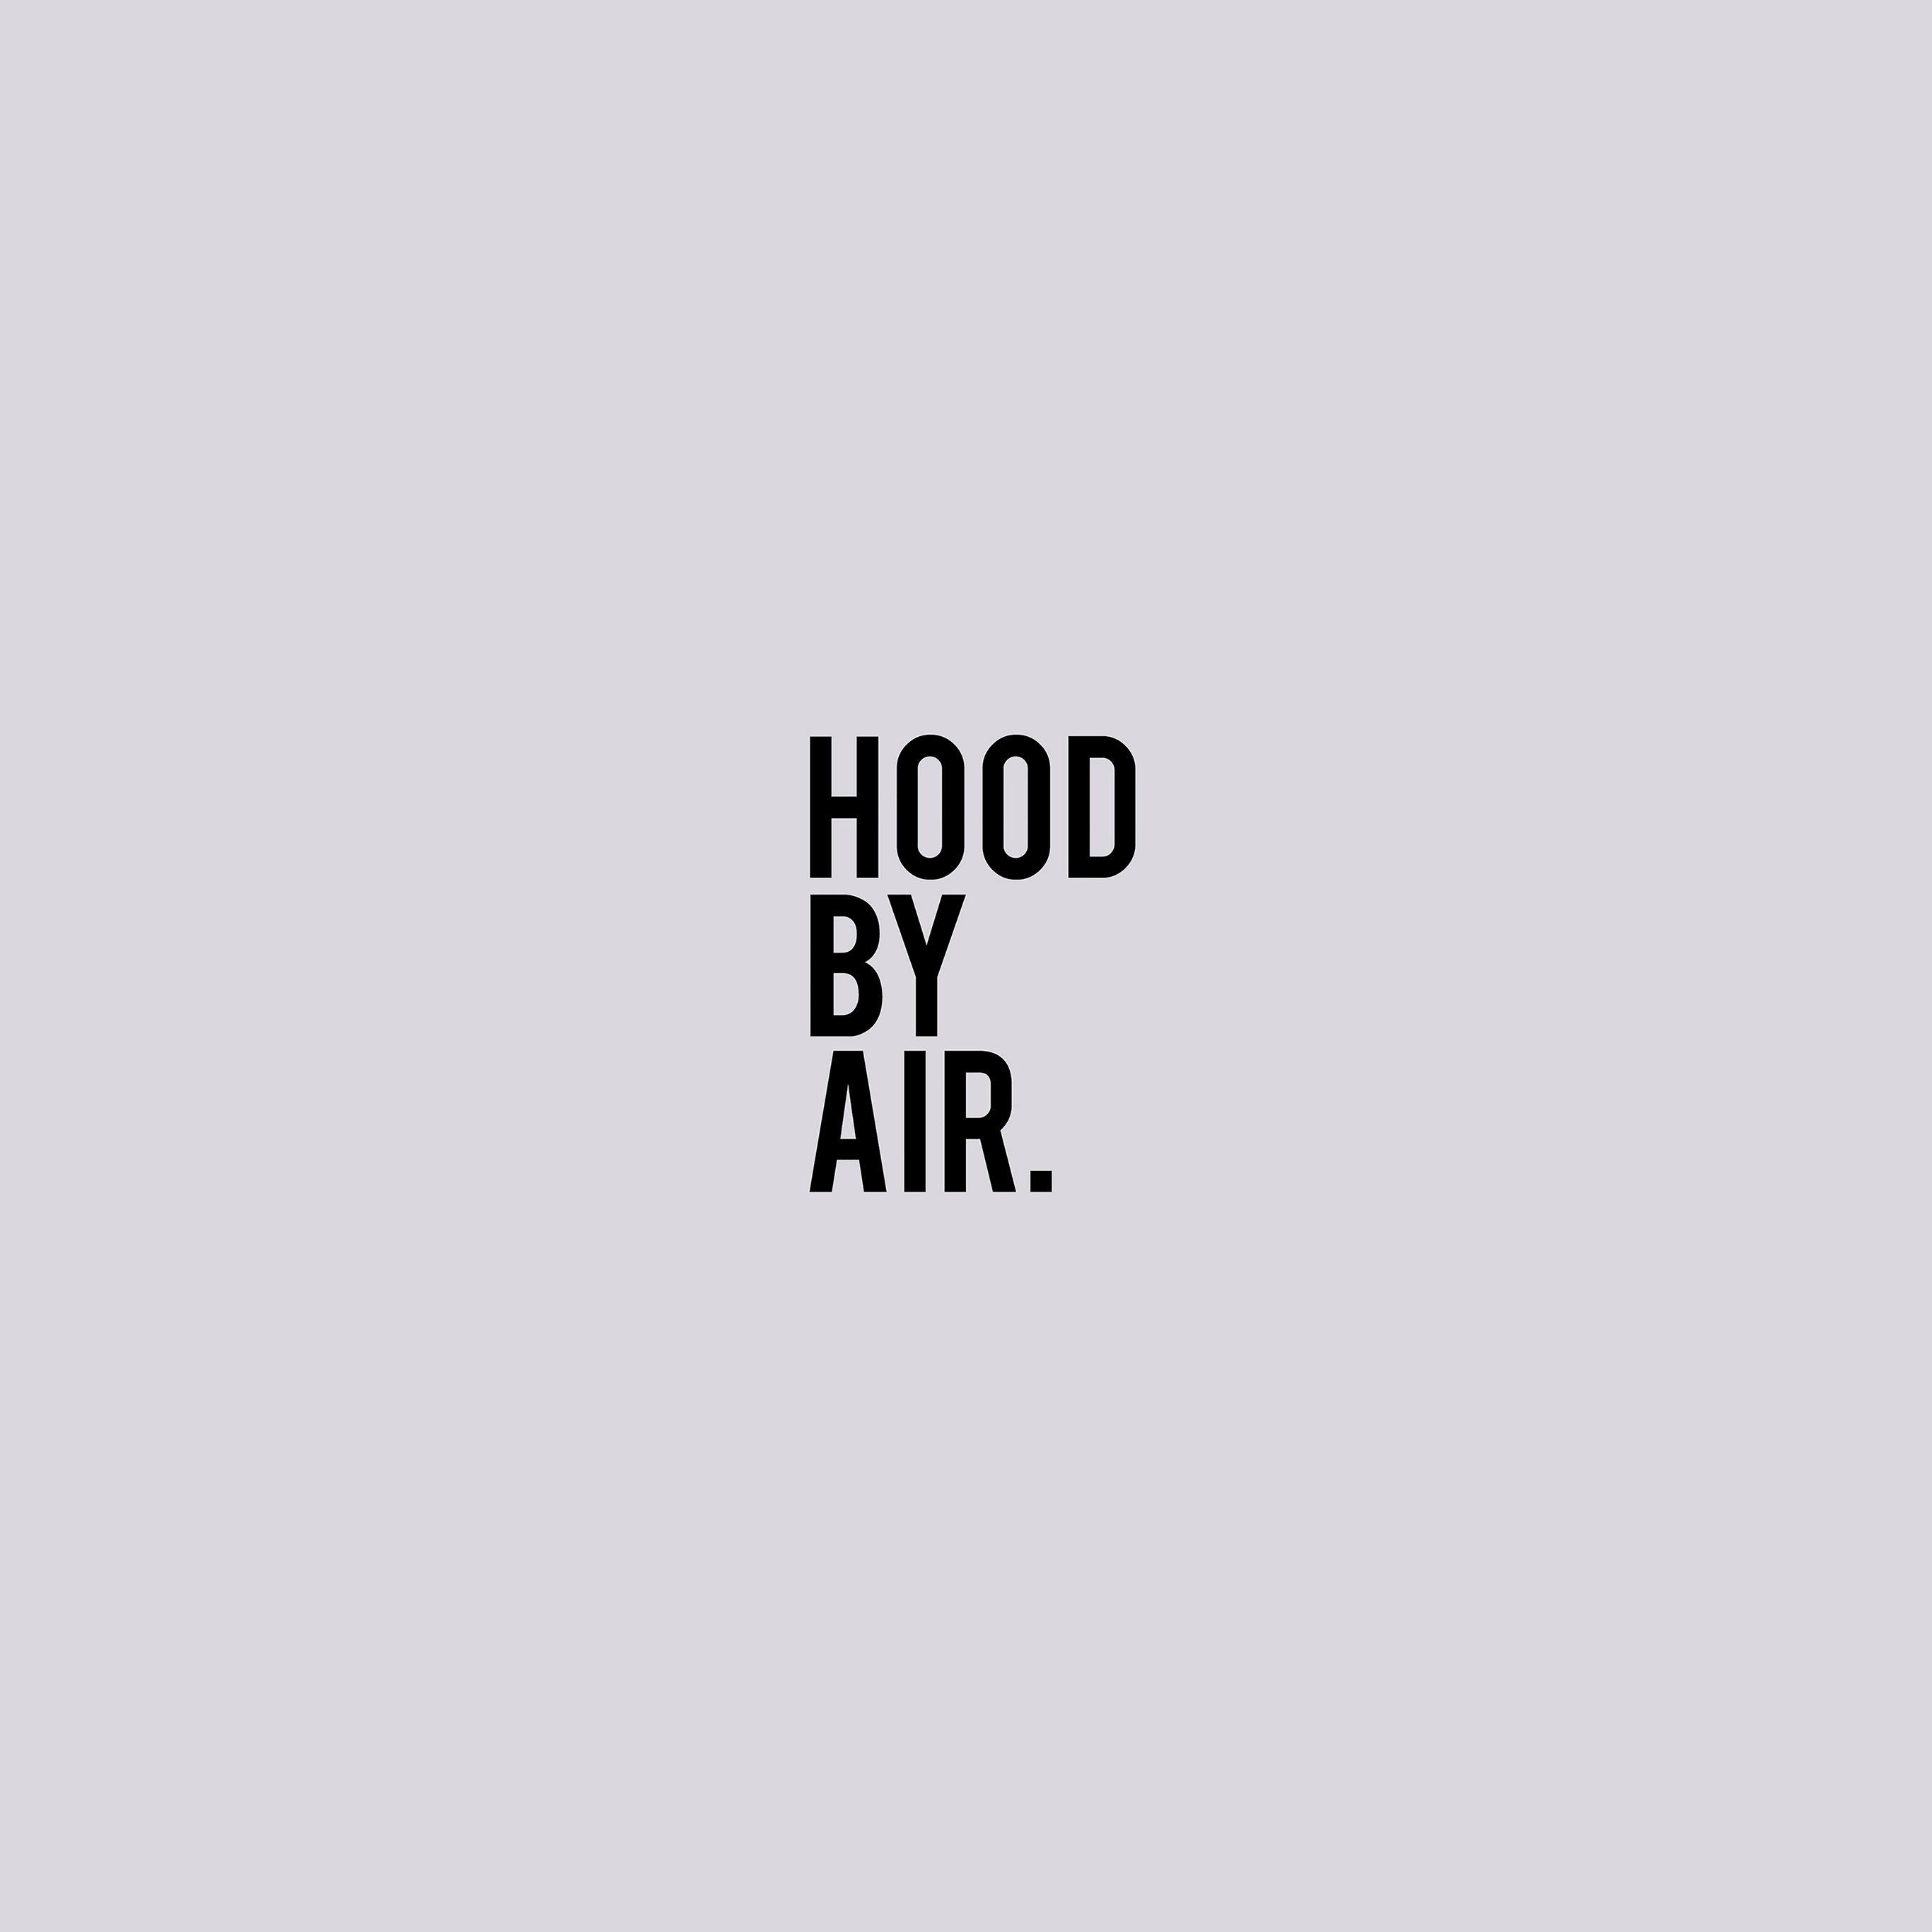 Hood by Air Logo - ac81-wallpaper-hood-by-air-logo-white-minimal - Papers.co